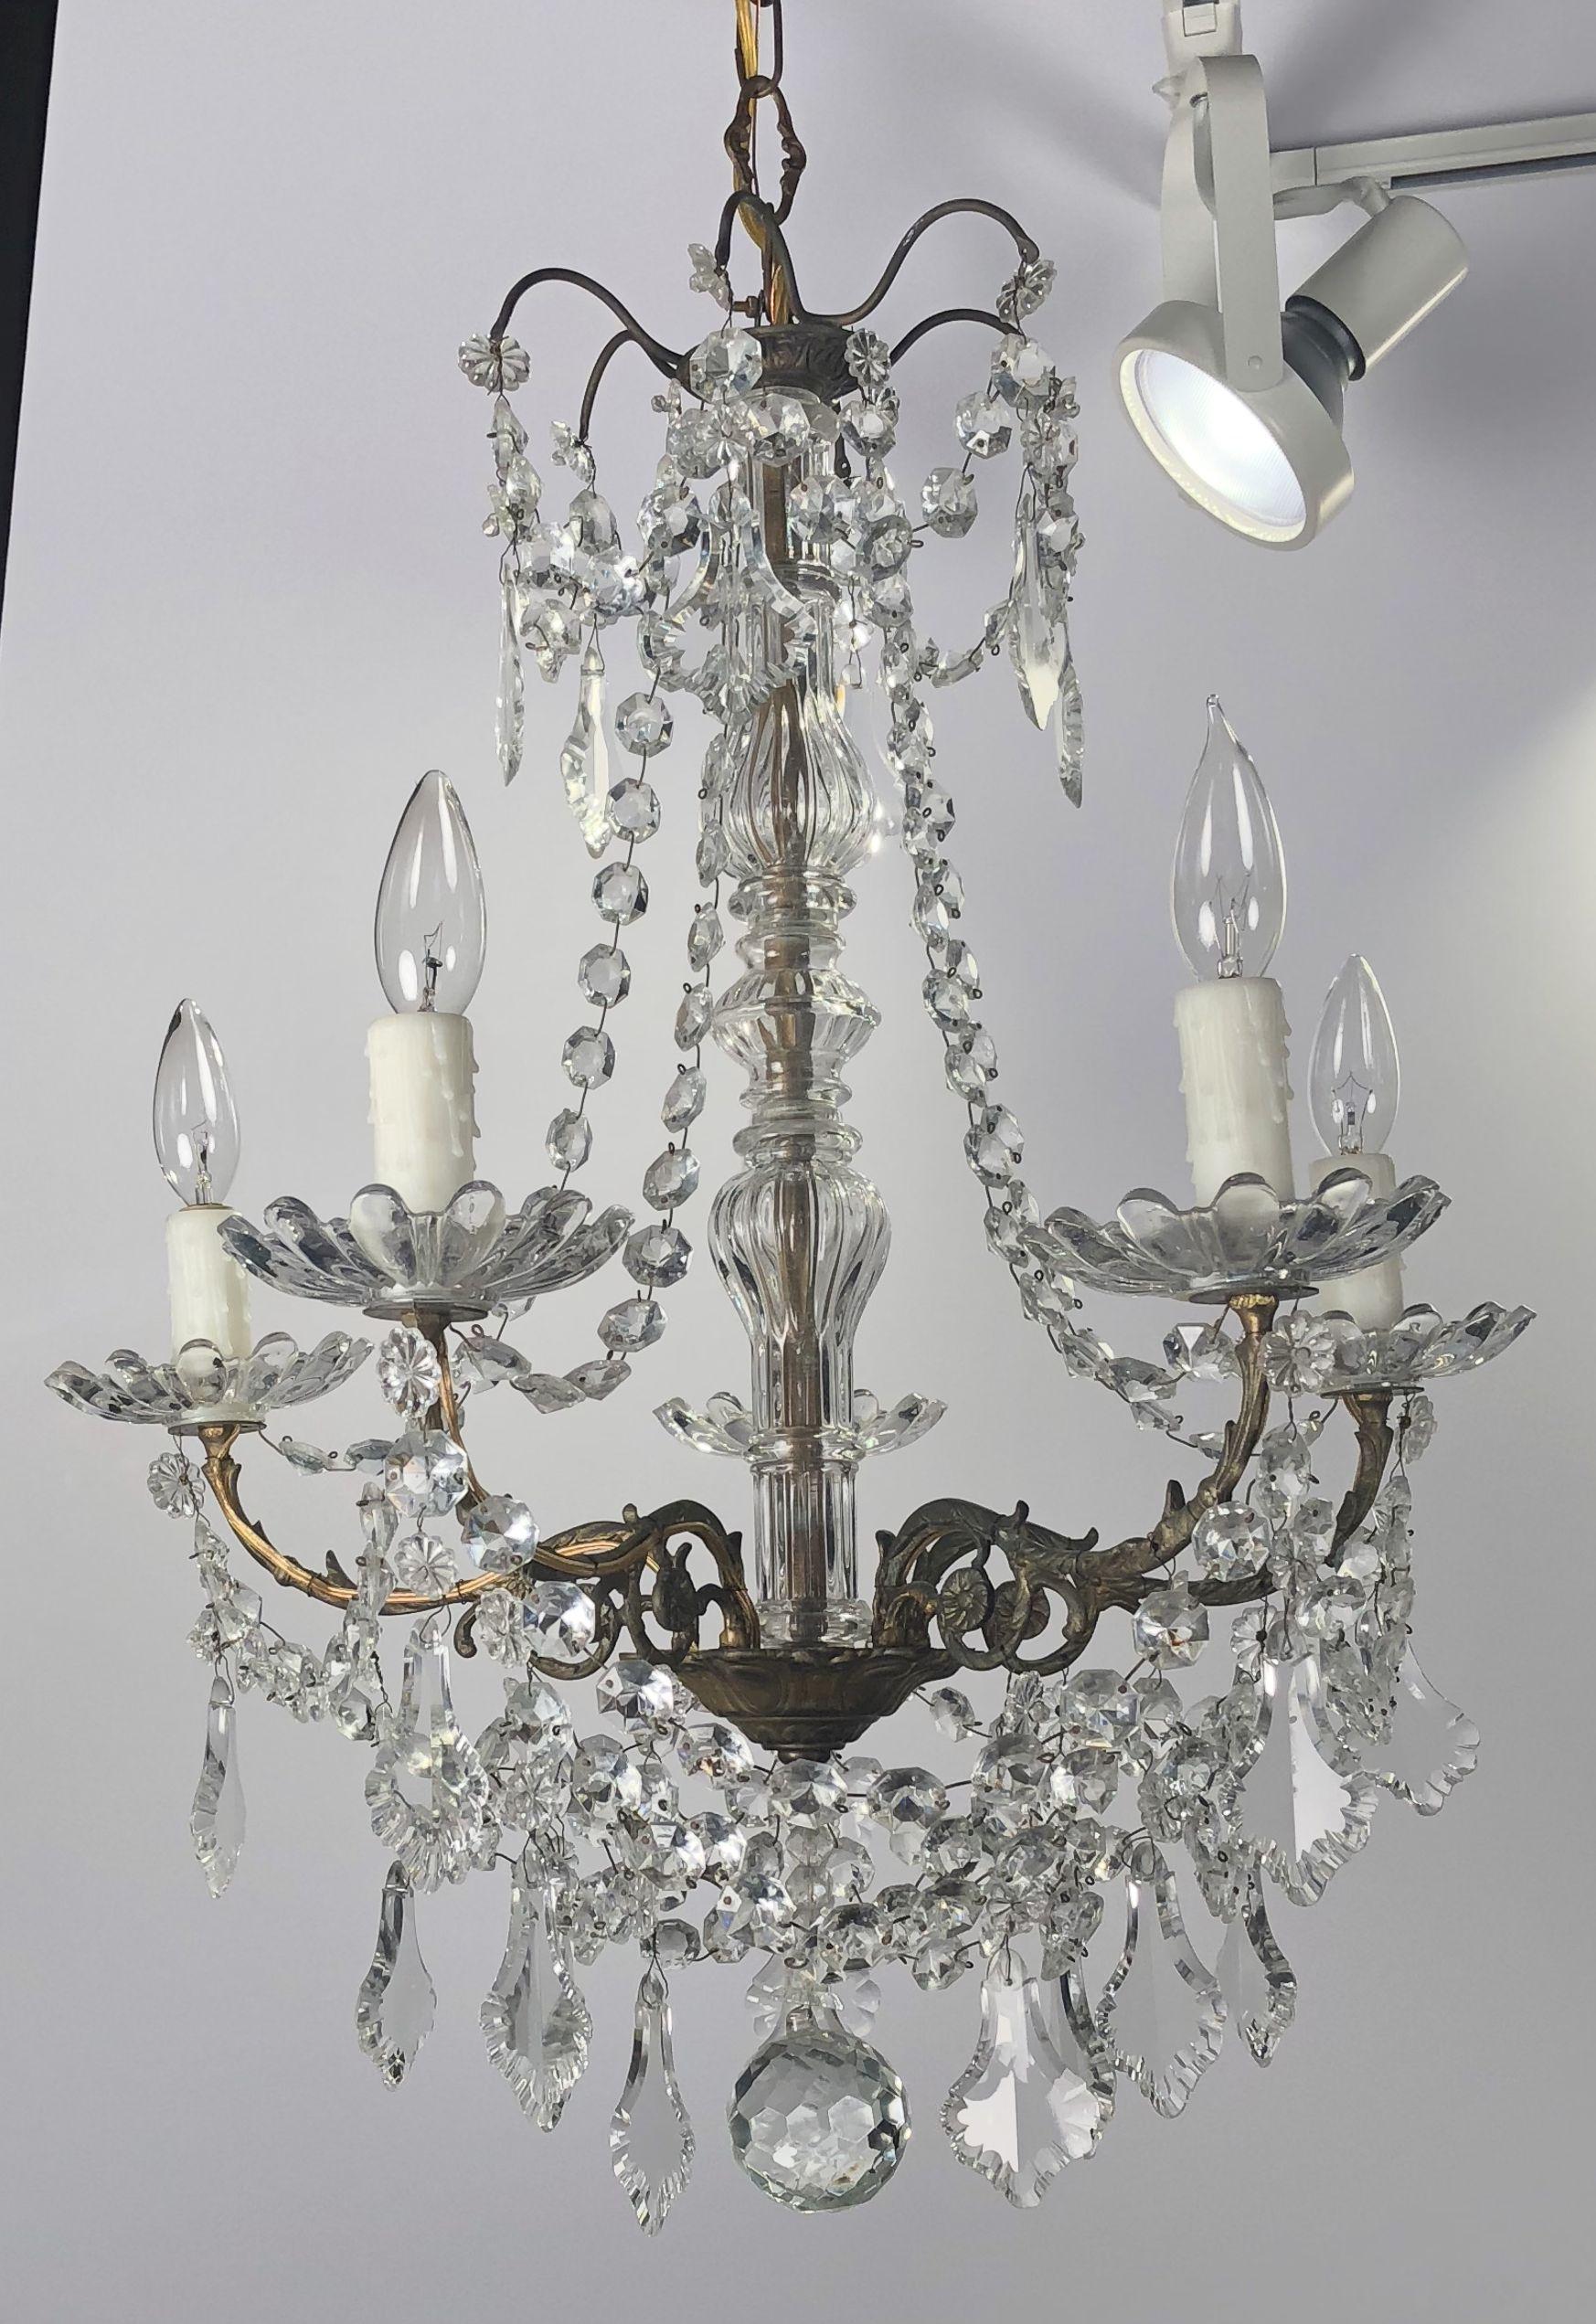 A lovely French five-light chandelier (or hanging fixture) of crystal, glass and gilt metal, in the Louis XV style, featuring serpentine arms, each candle light with dangling pendants and decorative bobeches.

Dimensions: Diameter 21 inches x